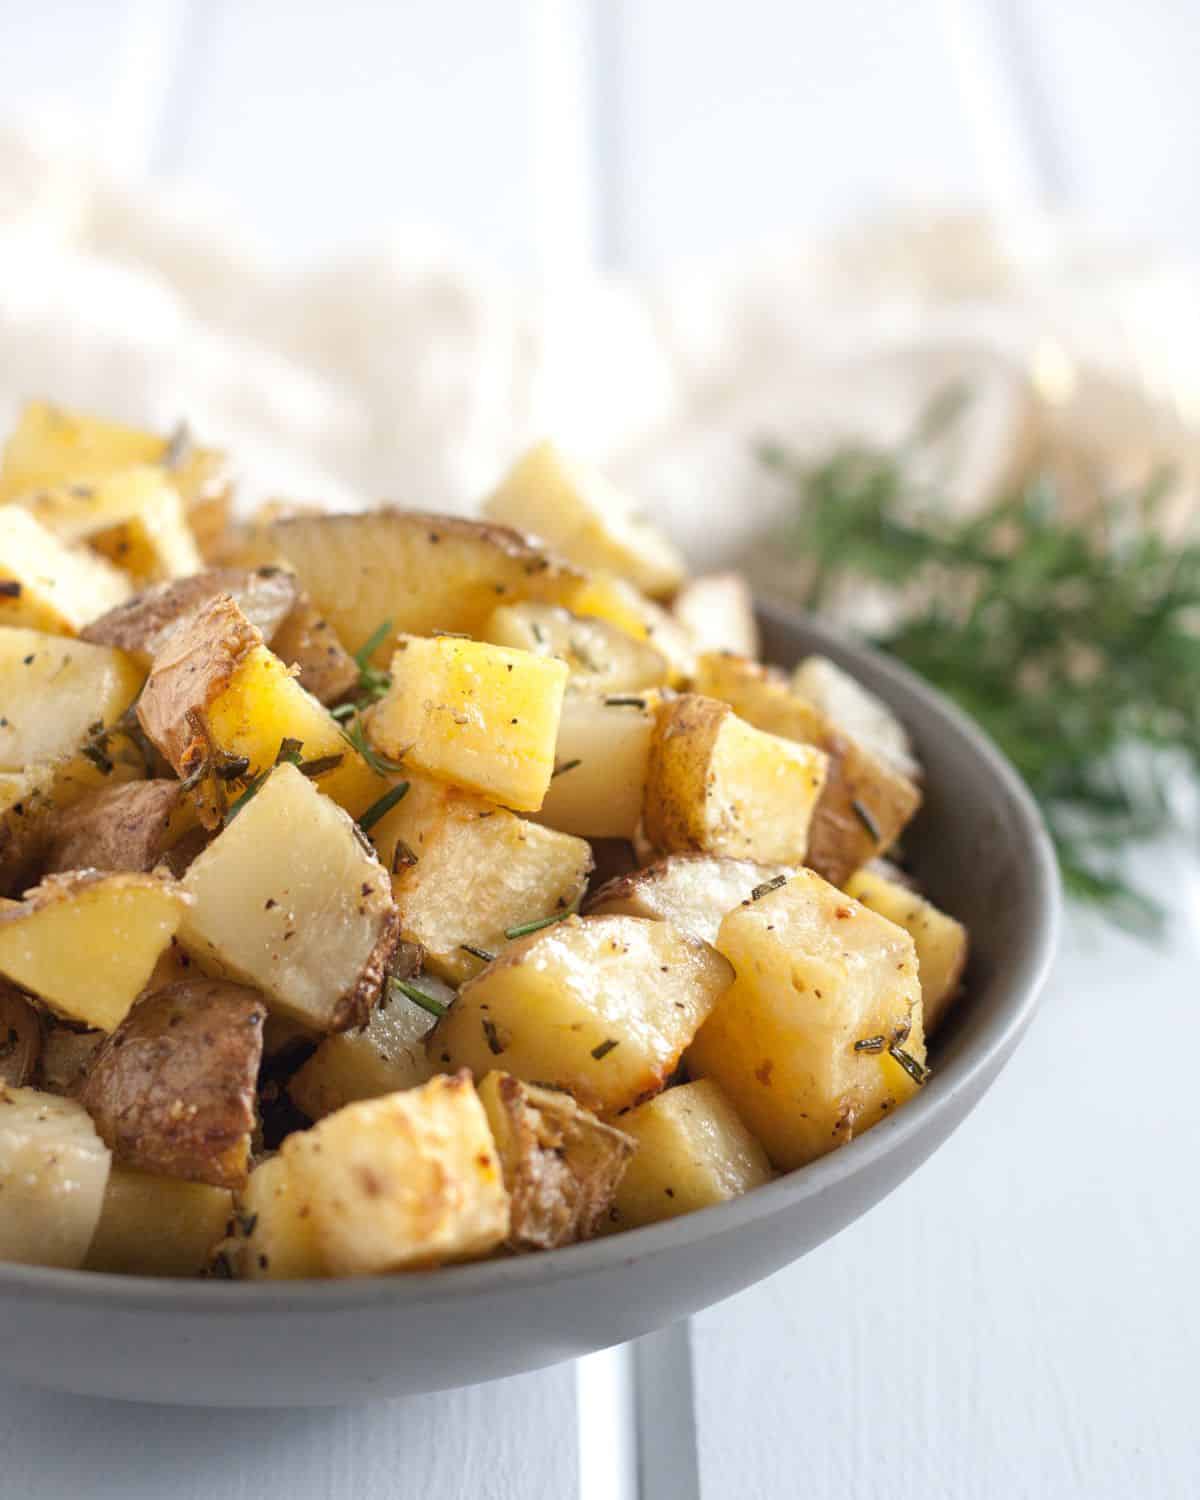 Crazy good rosemary garlic oven roasted potatoes - an easy to make side dish. Recipe on GoodieGodmother.com